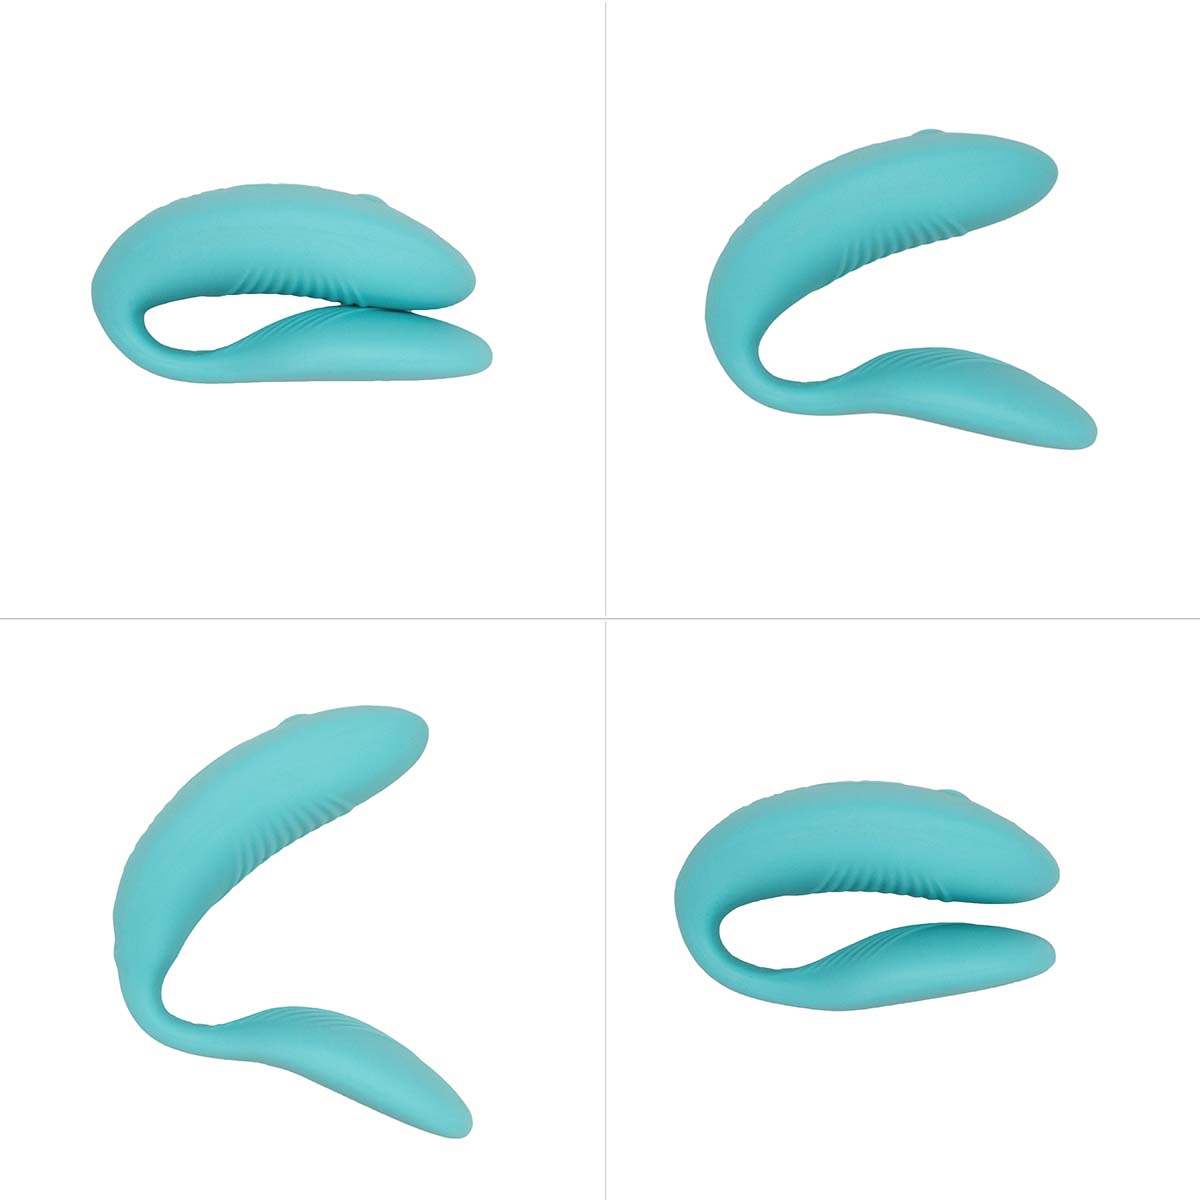 Multiple views of an aqua silicone couples vibrator bent into multiple angles Nudie Co